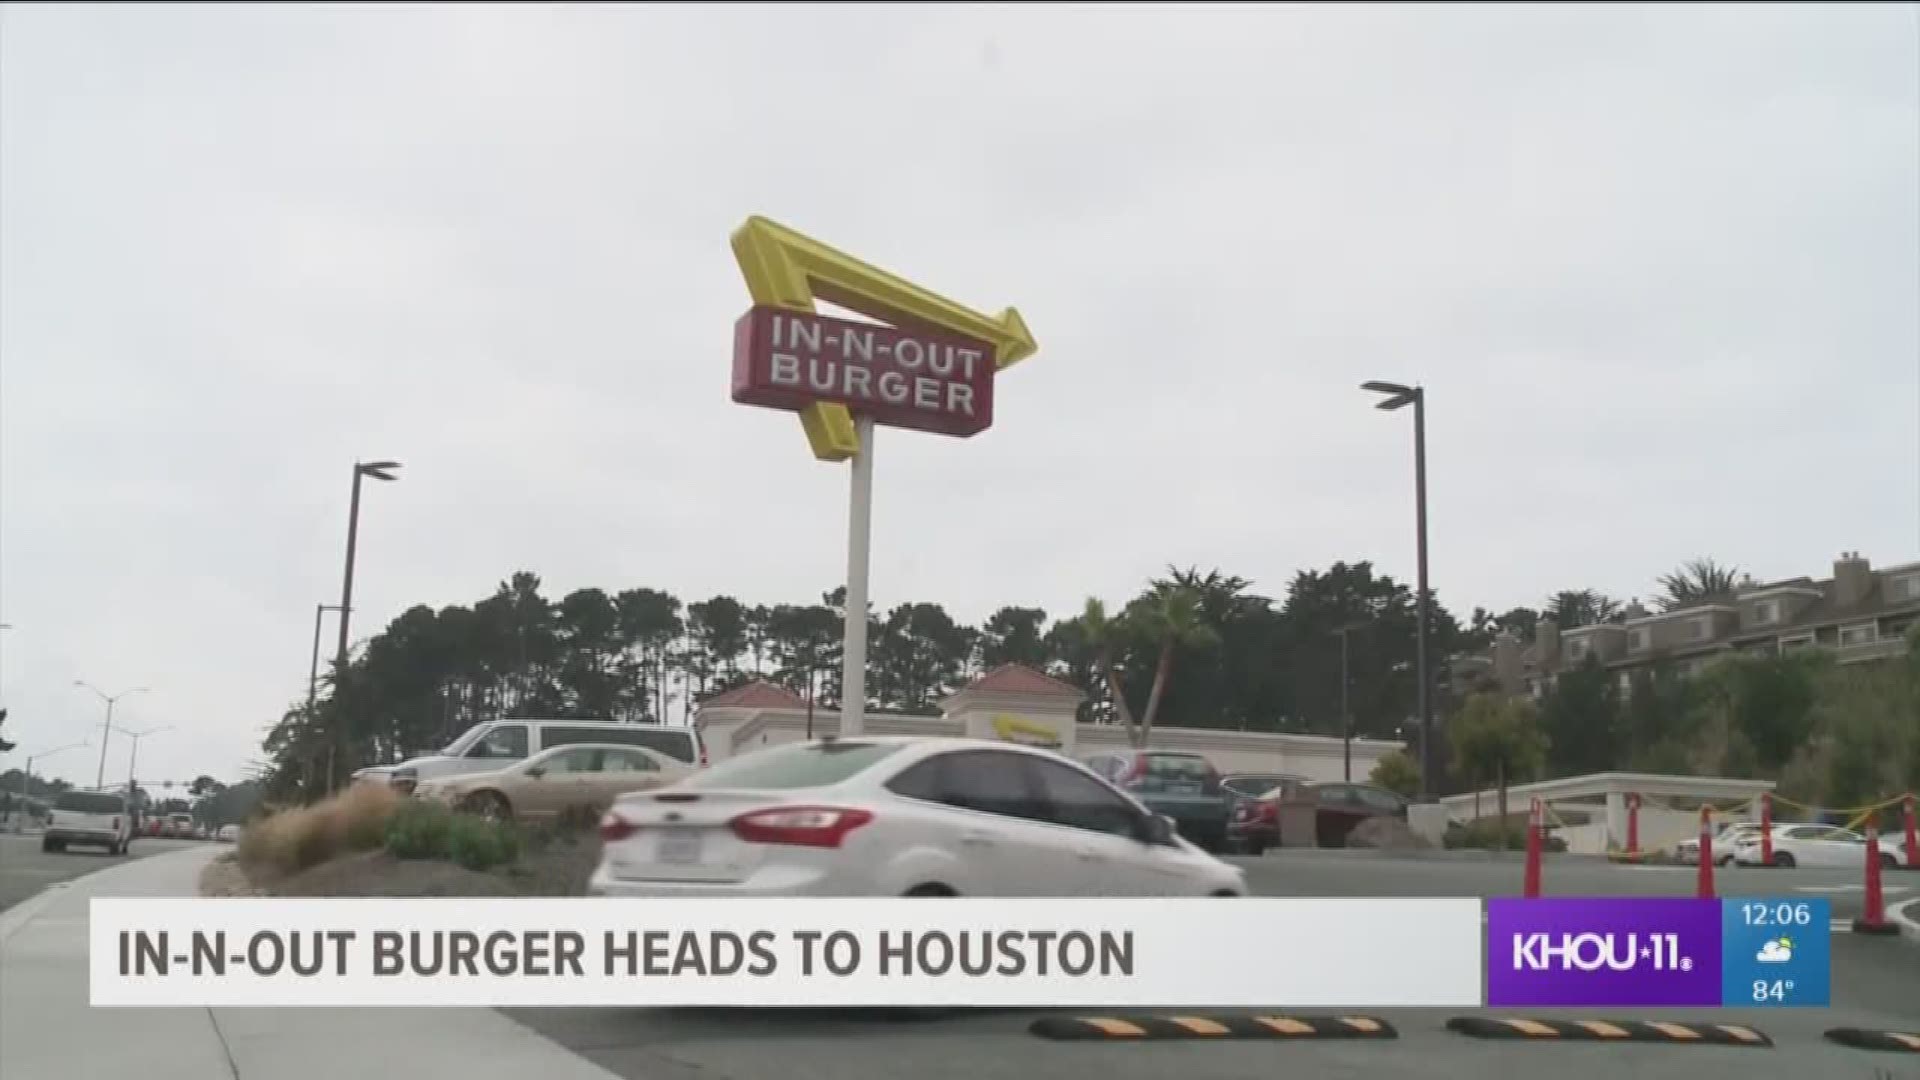 The former Texas Instruments campus in Stafford is getting a big makeover, and it will include an In-N-Out Burger.